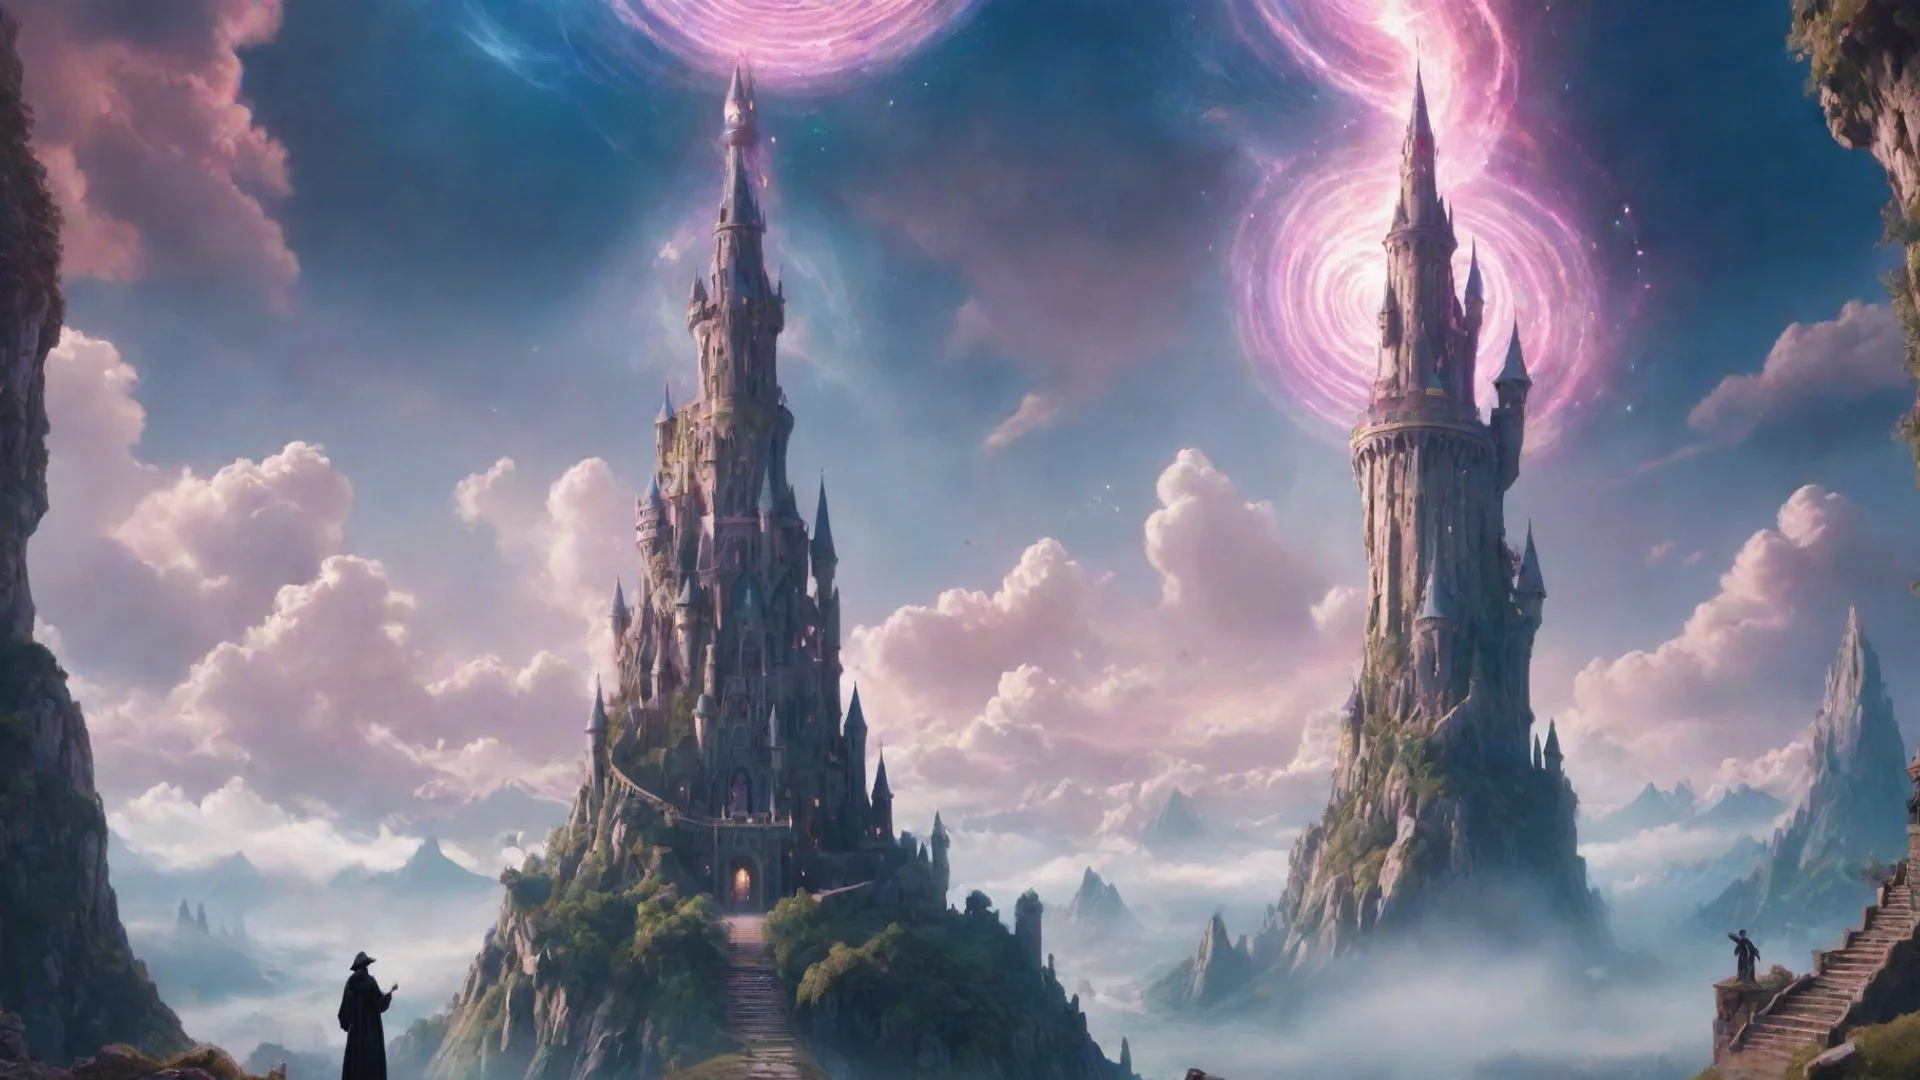 amazing magical world with a wizard looking a spiraling impossible tower hd aesthetic omg awesome portrait 2 wide